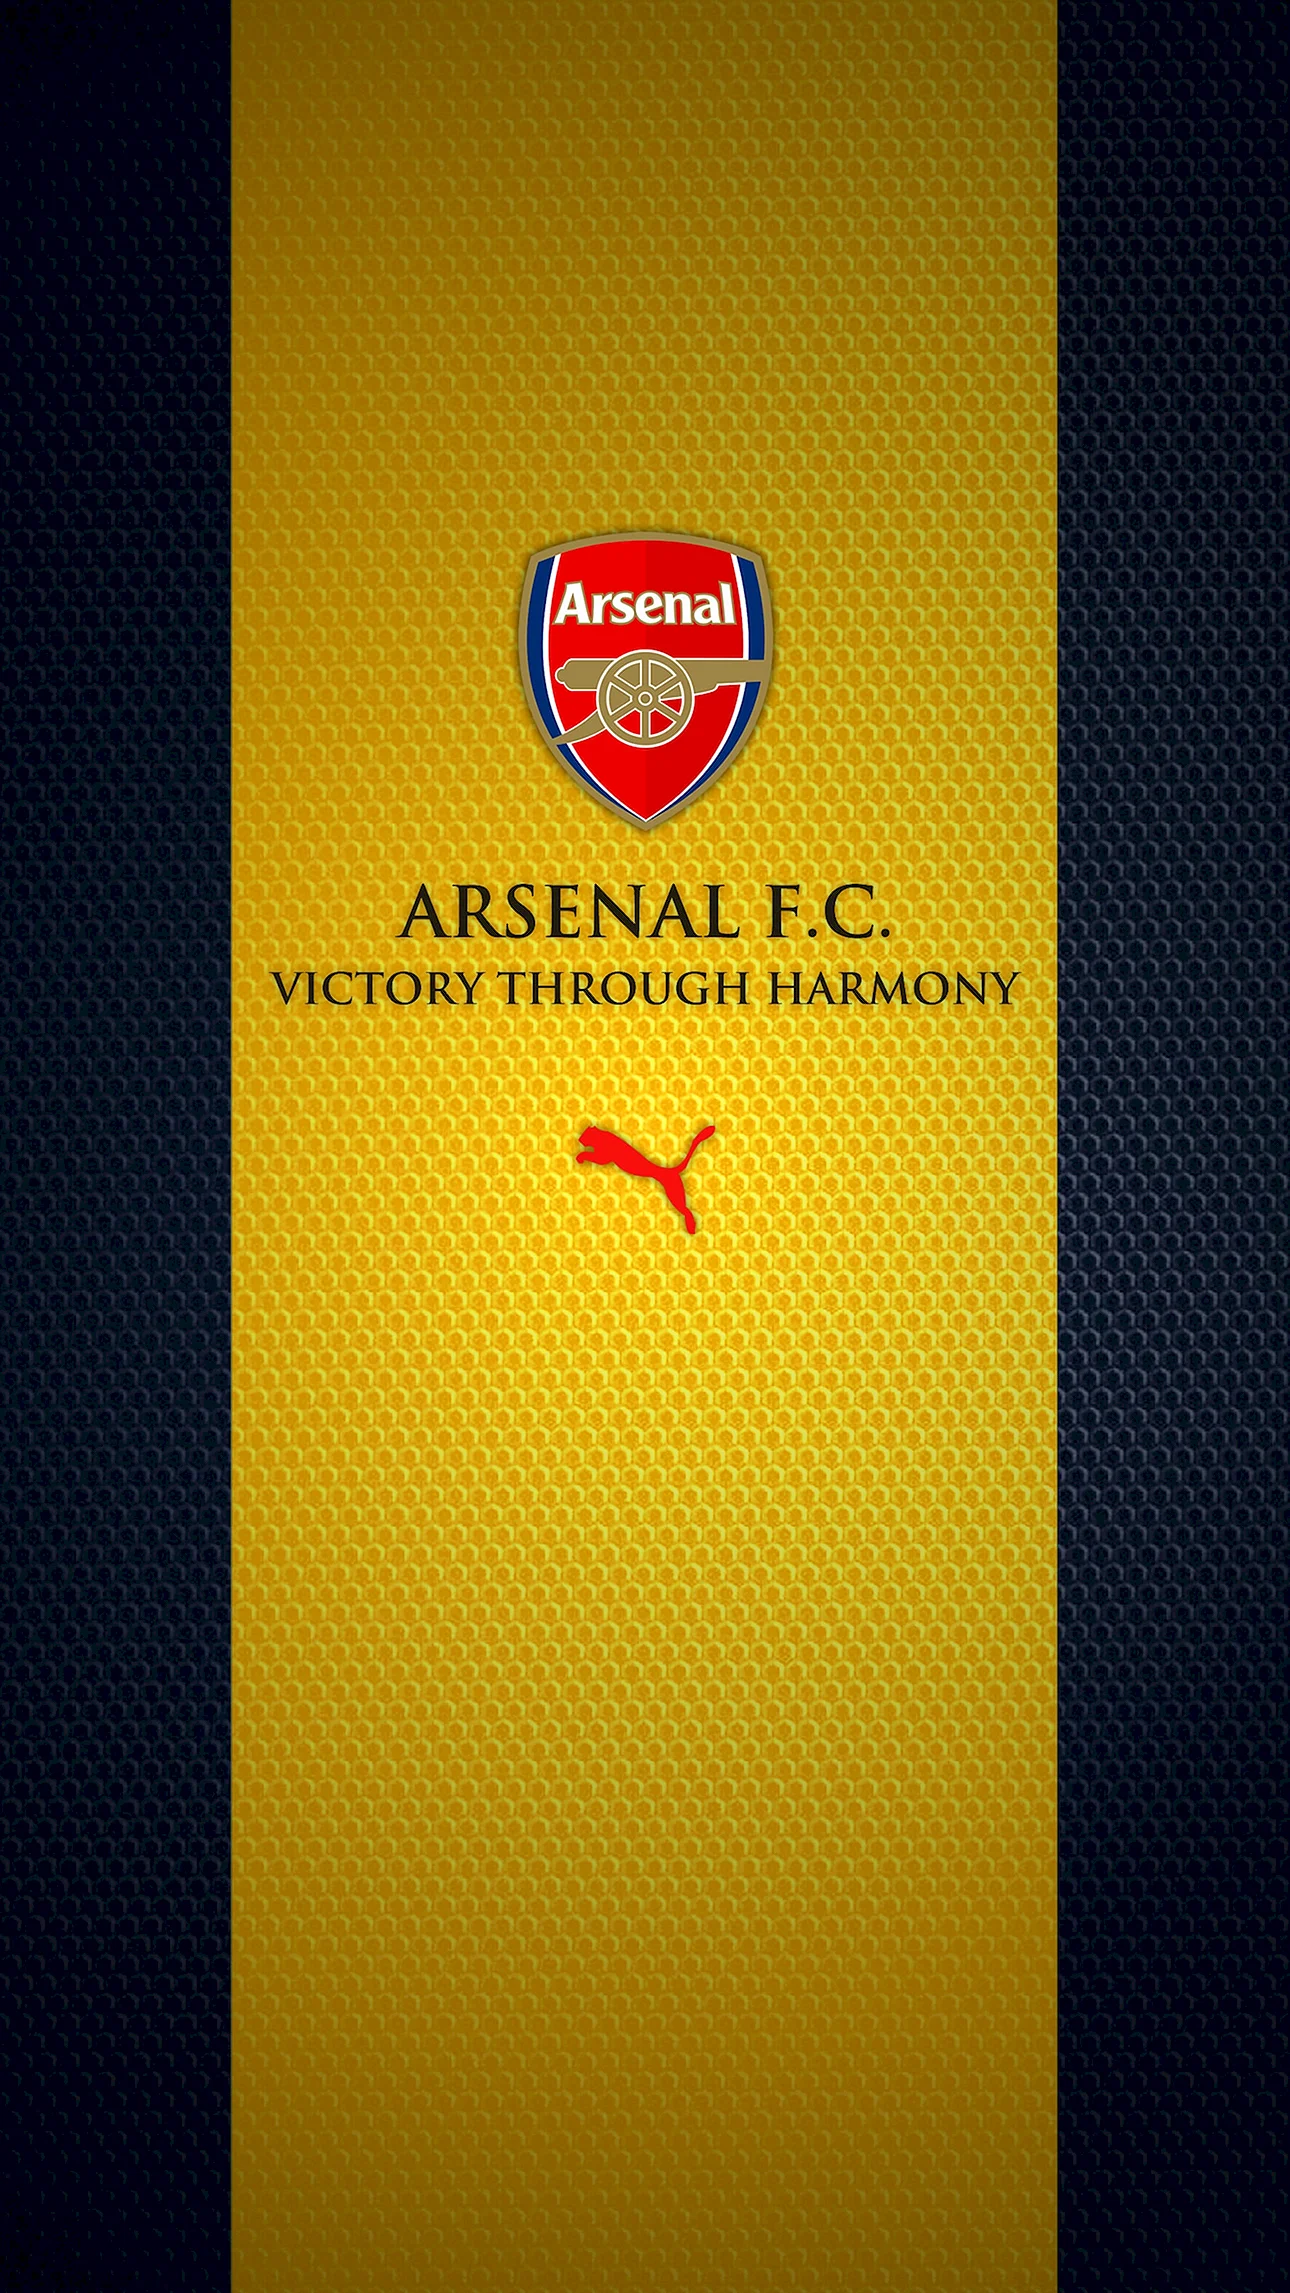 Arsenal HD Android Wallpaper For iPhone